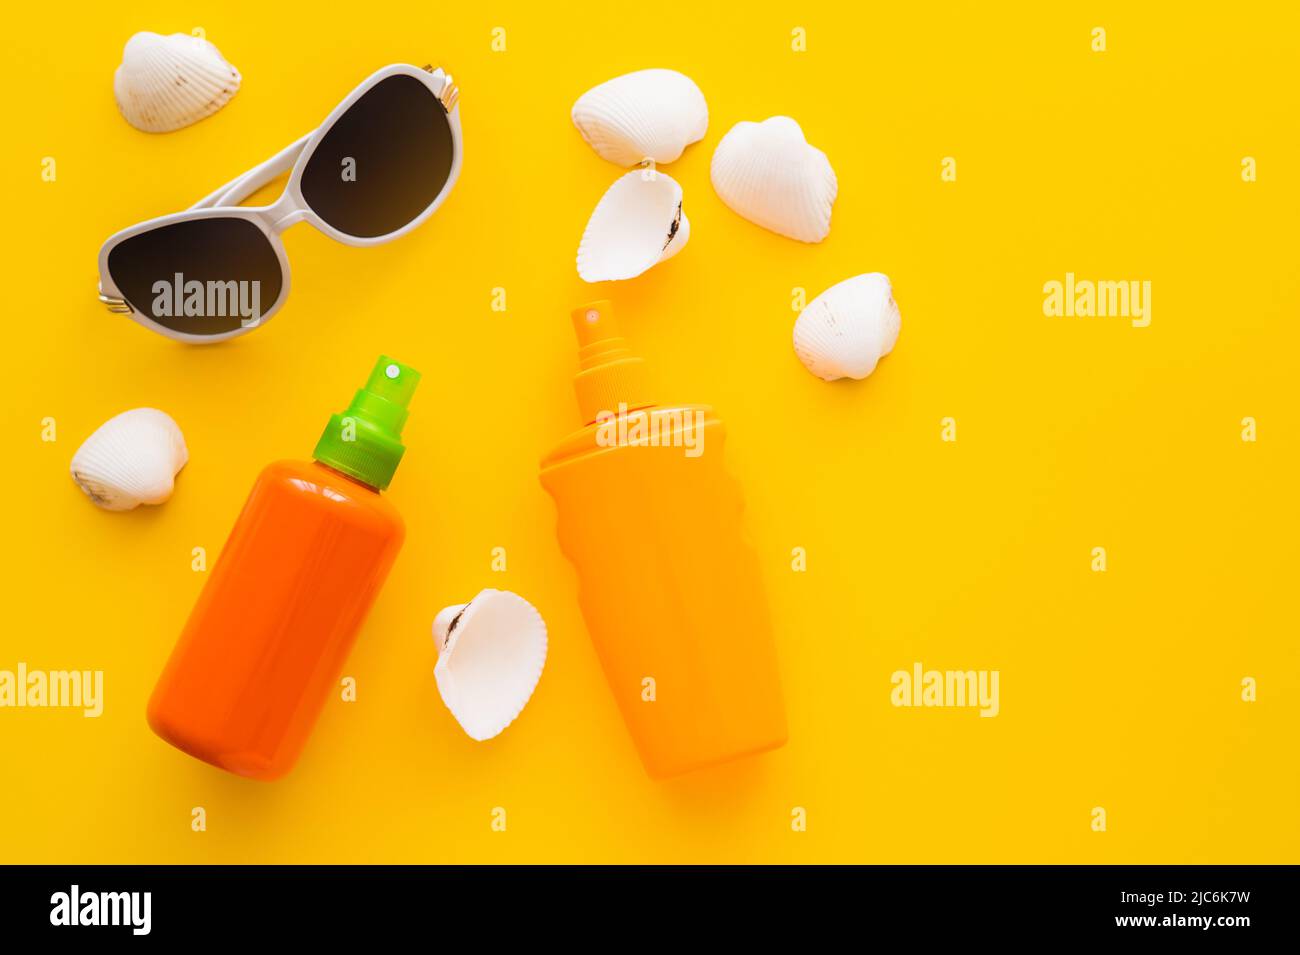 Top view of sunglasses near sunscreens and seashells on yellow background Stock Photo